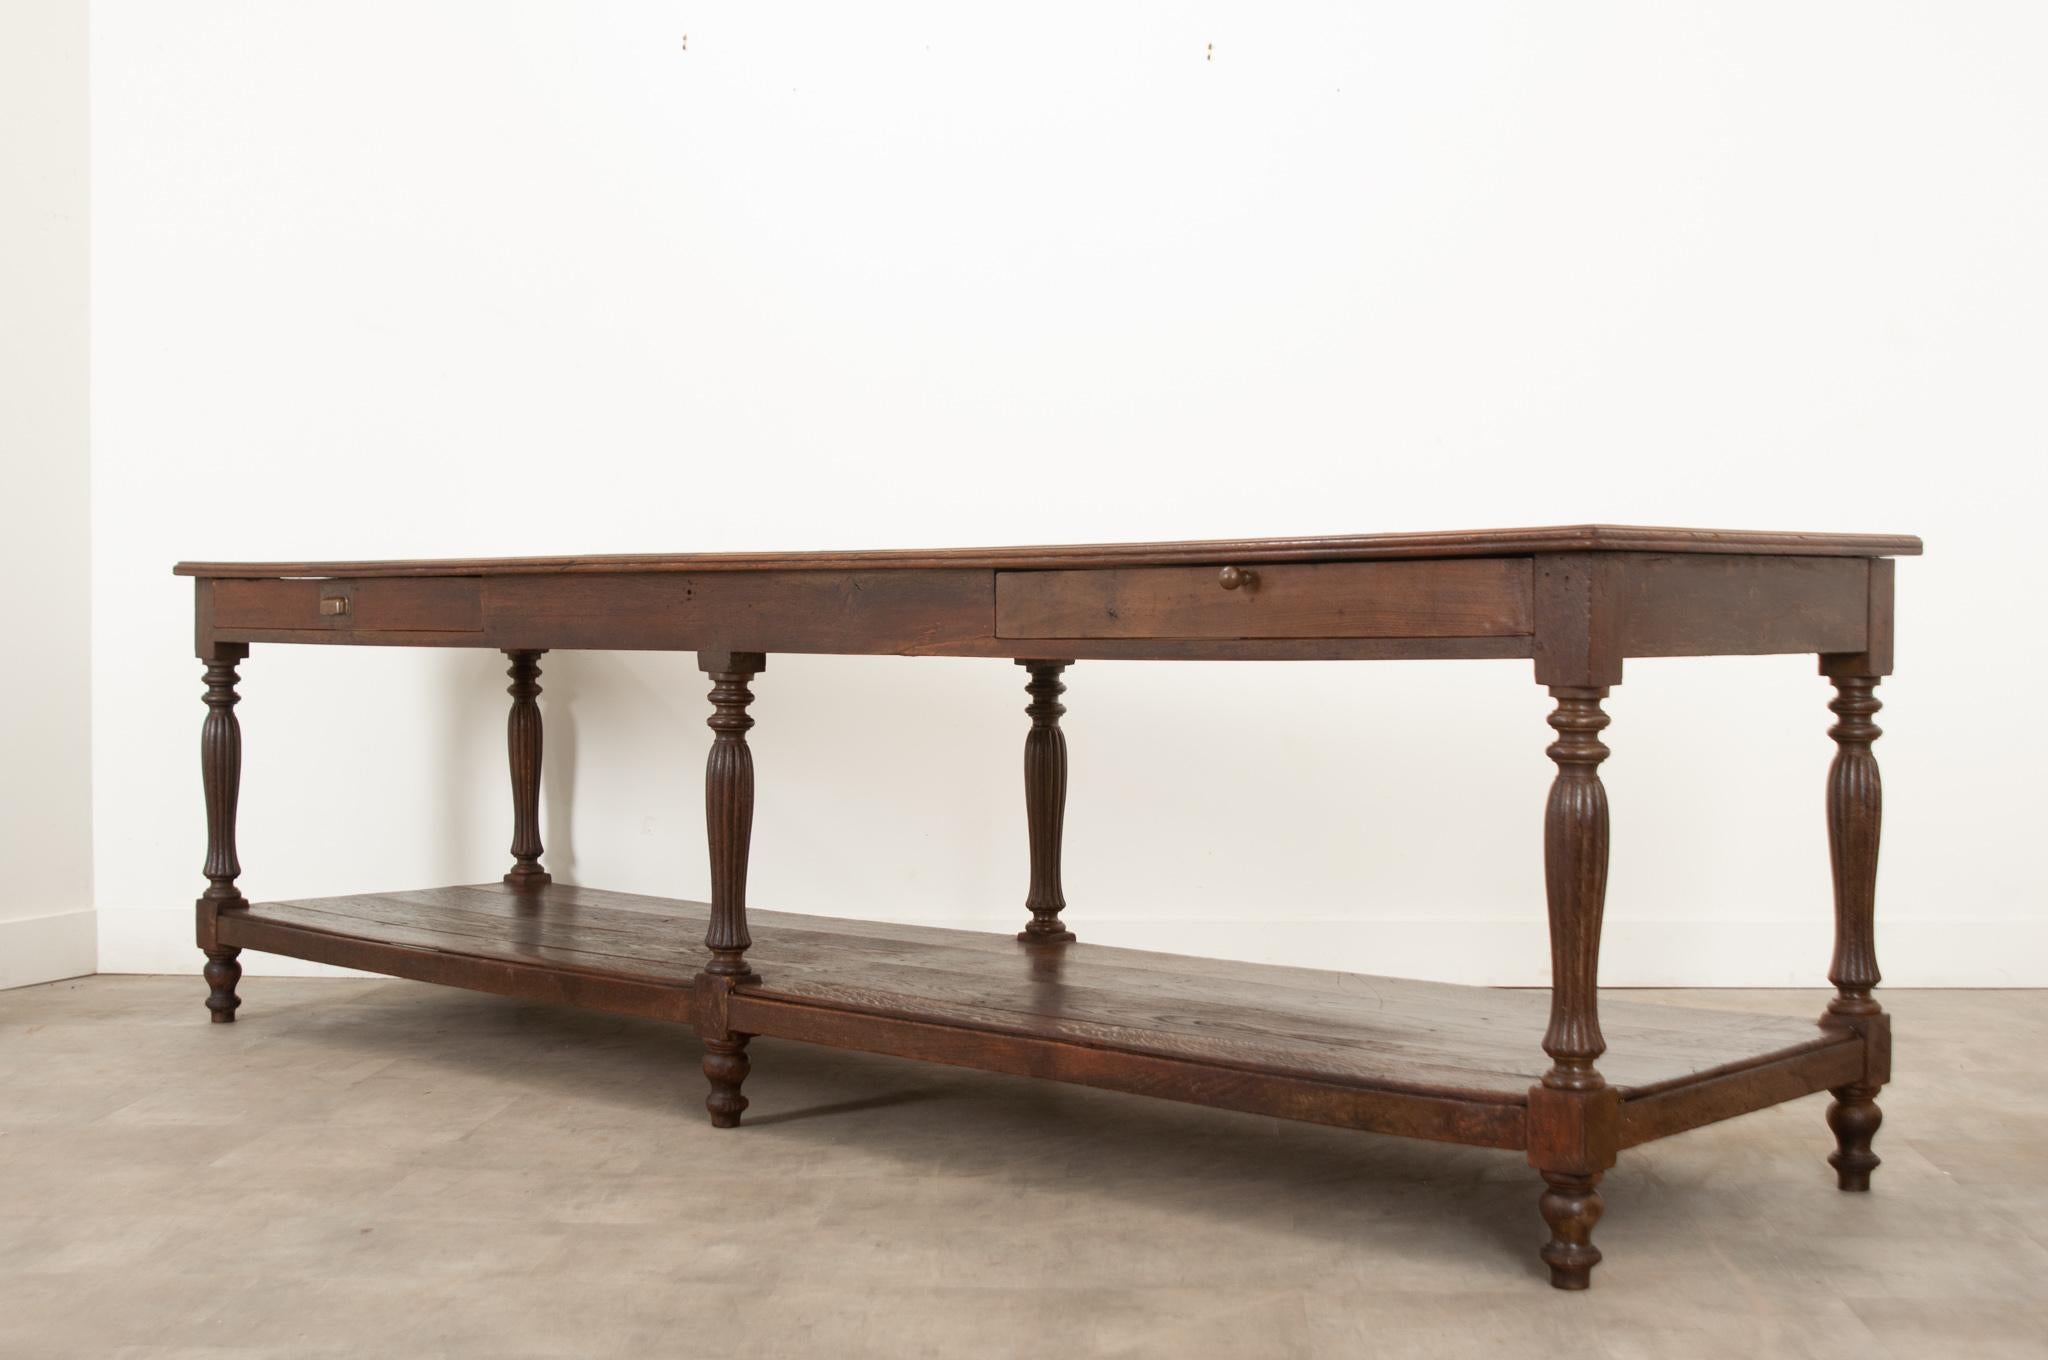 This grand French oak drapery table is over 10 feet long.  The top surface is constructed of parqueted hardwood and has obtained a beautiful patina over the years.  There are two drawers with handles on one long side of the table that slide with